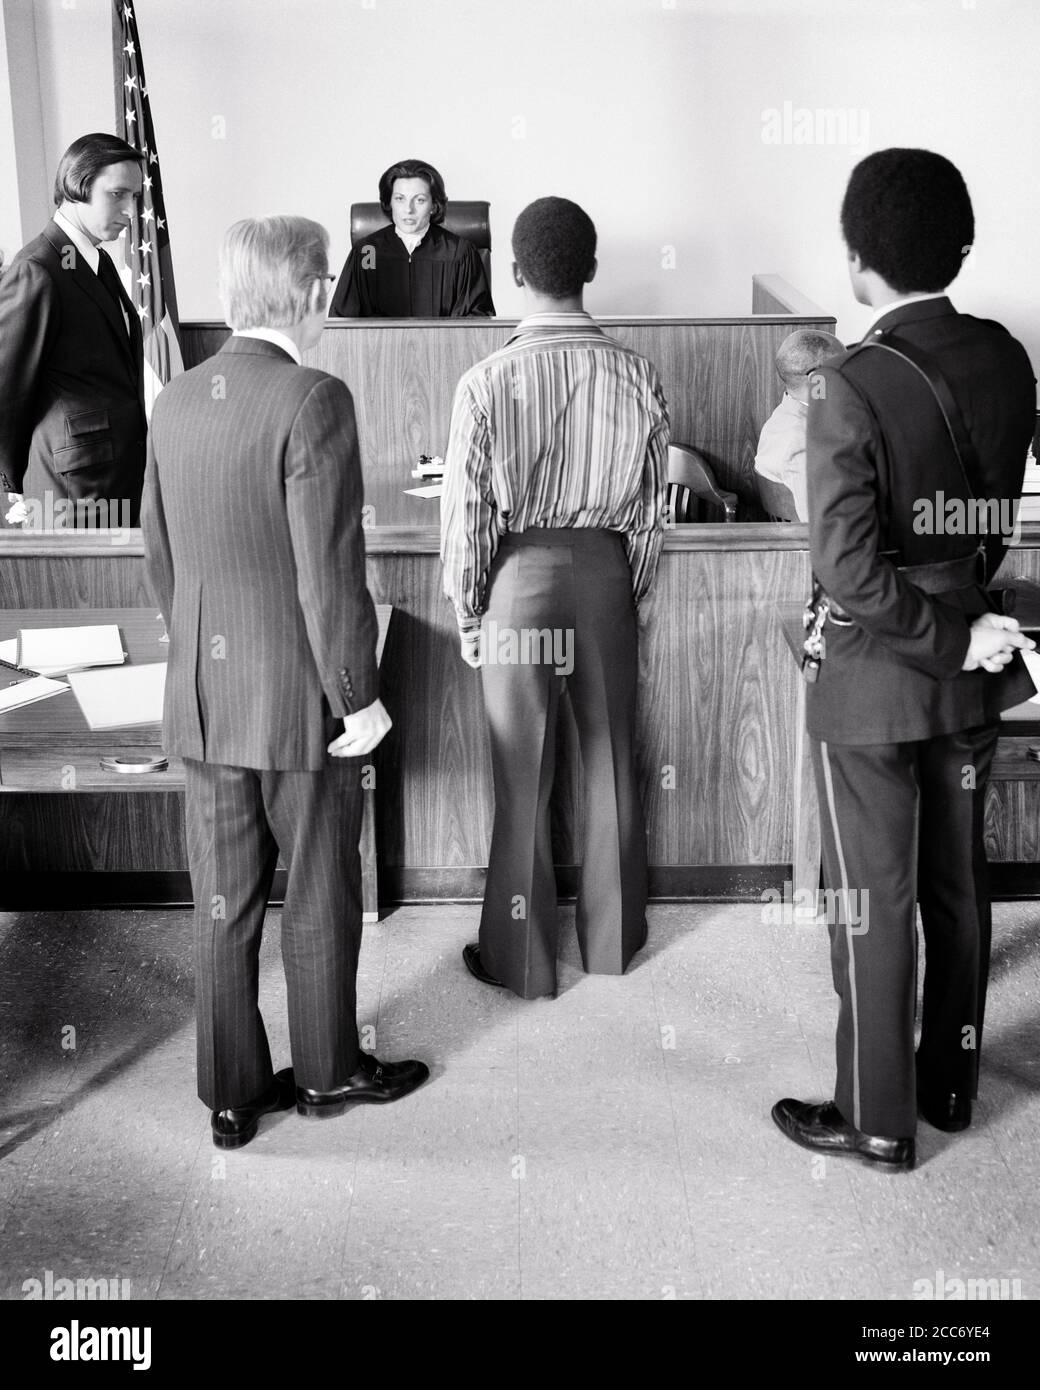 1970s COURTROOM SCENE AFRICAN-AMERICAN TEEN  BOY STANDING BEFORE FEMALE JUDGE WITH BAILIFF AND ATTORNEY - s20710 HAR001 HARS URBAN DIVERSITY JUSTICE OLD TIME FUTURE NOSTALGIA OLD FASHION 1 POLICEMAN JUVENILE LEGAL STYLE DIVERSE FEAR COMMUNICATION SERVE YOUNG ADULT TEAMWORK TROUBLE INFORMATION DIFFERENT LIFESTYLE FEMALES COPY SPACE FULL-LENGTH HALF-LENGTH LADIES TRIAL PERSONS CARING MALES RISK ORDER OFFICER TEENAGE BOY B&W SADNESS COP FREEDOM GOALS SUIT AND TIE BEFORE PROTECT PROTECTION JUDICIAL LAWYERS AFRICAN-AMERICANS AFRICAN-AMERICAN AND KNOWLEDGE LEADERSHIP POWERFUL JUDGMENT Stock Photo